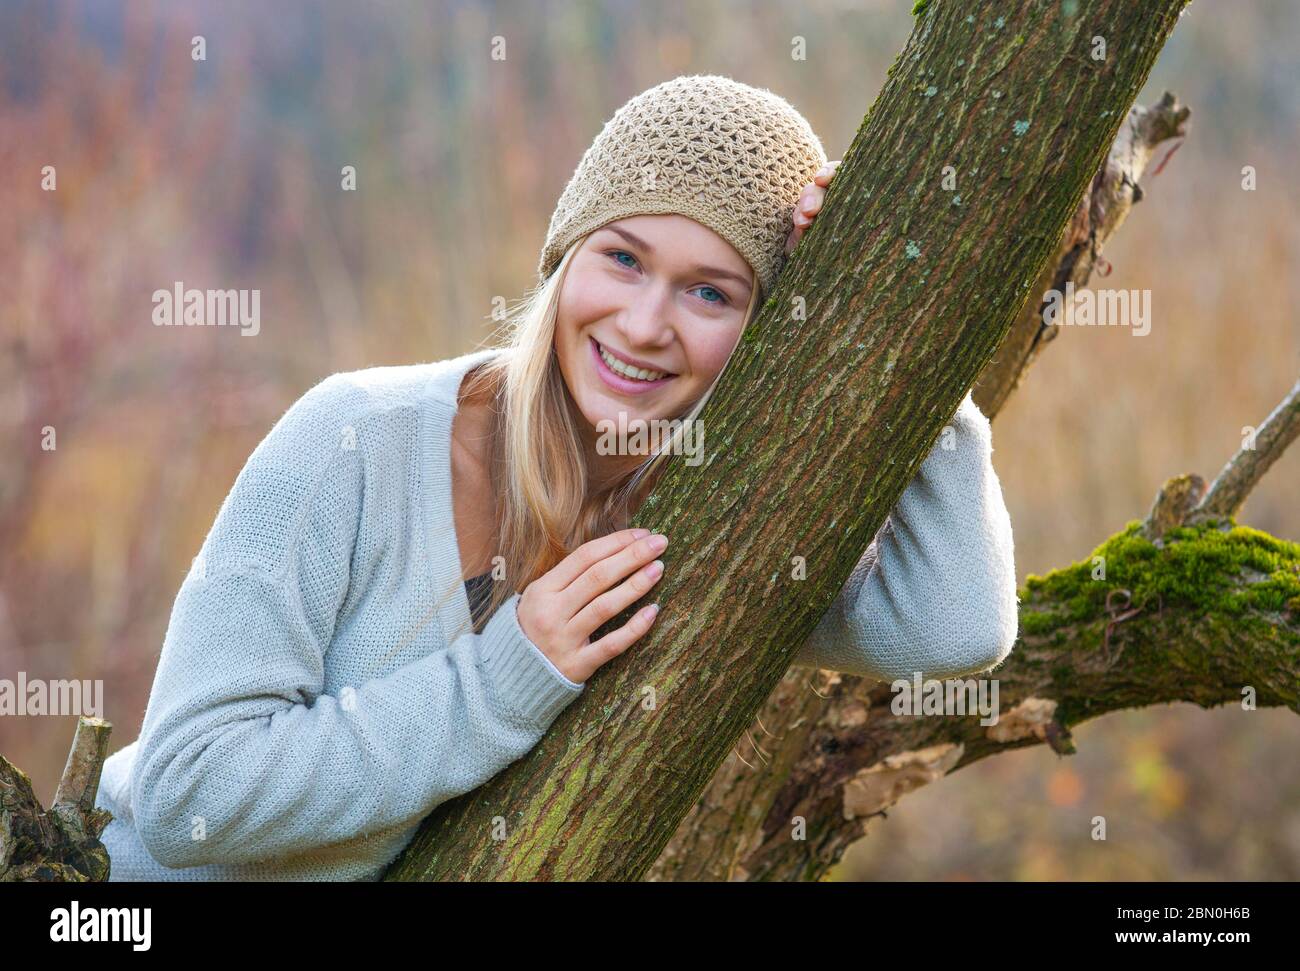 Girl with cap leaning against a tree in autumn, 17 years, Upper Austria, Austria Stock Photo